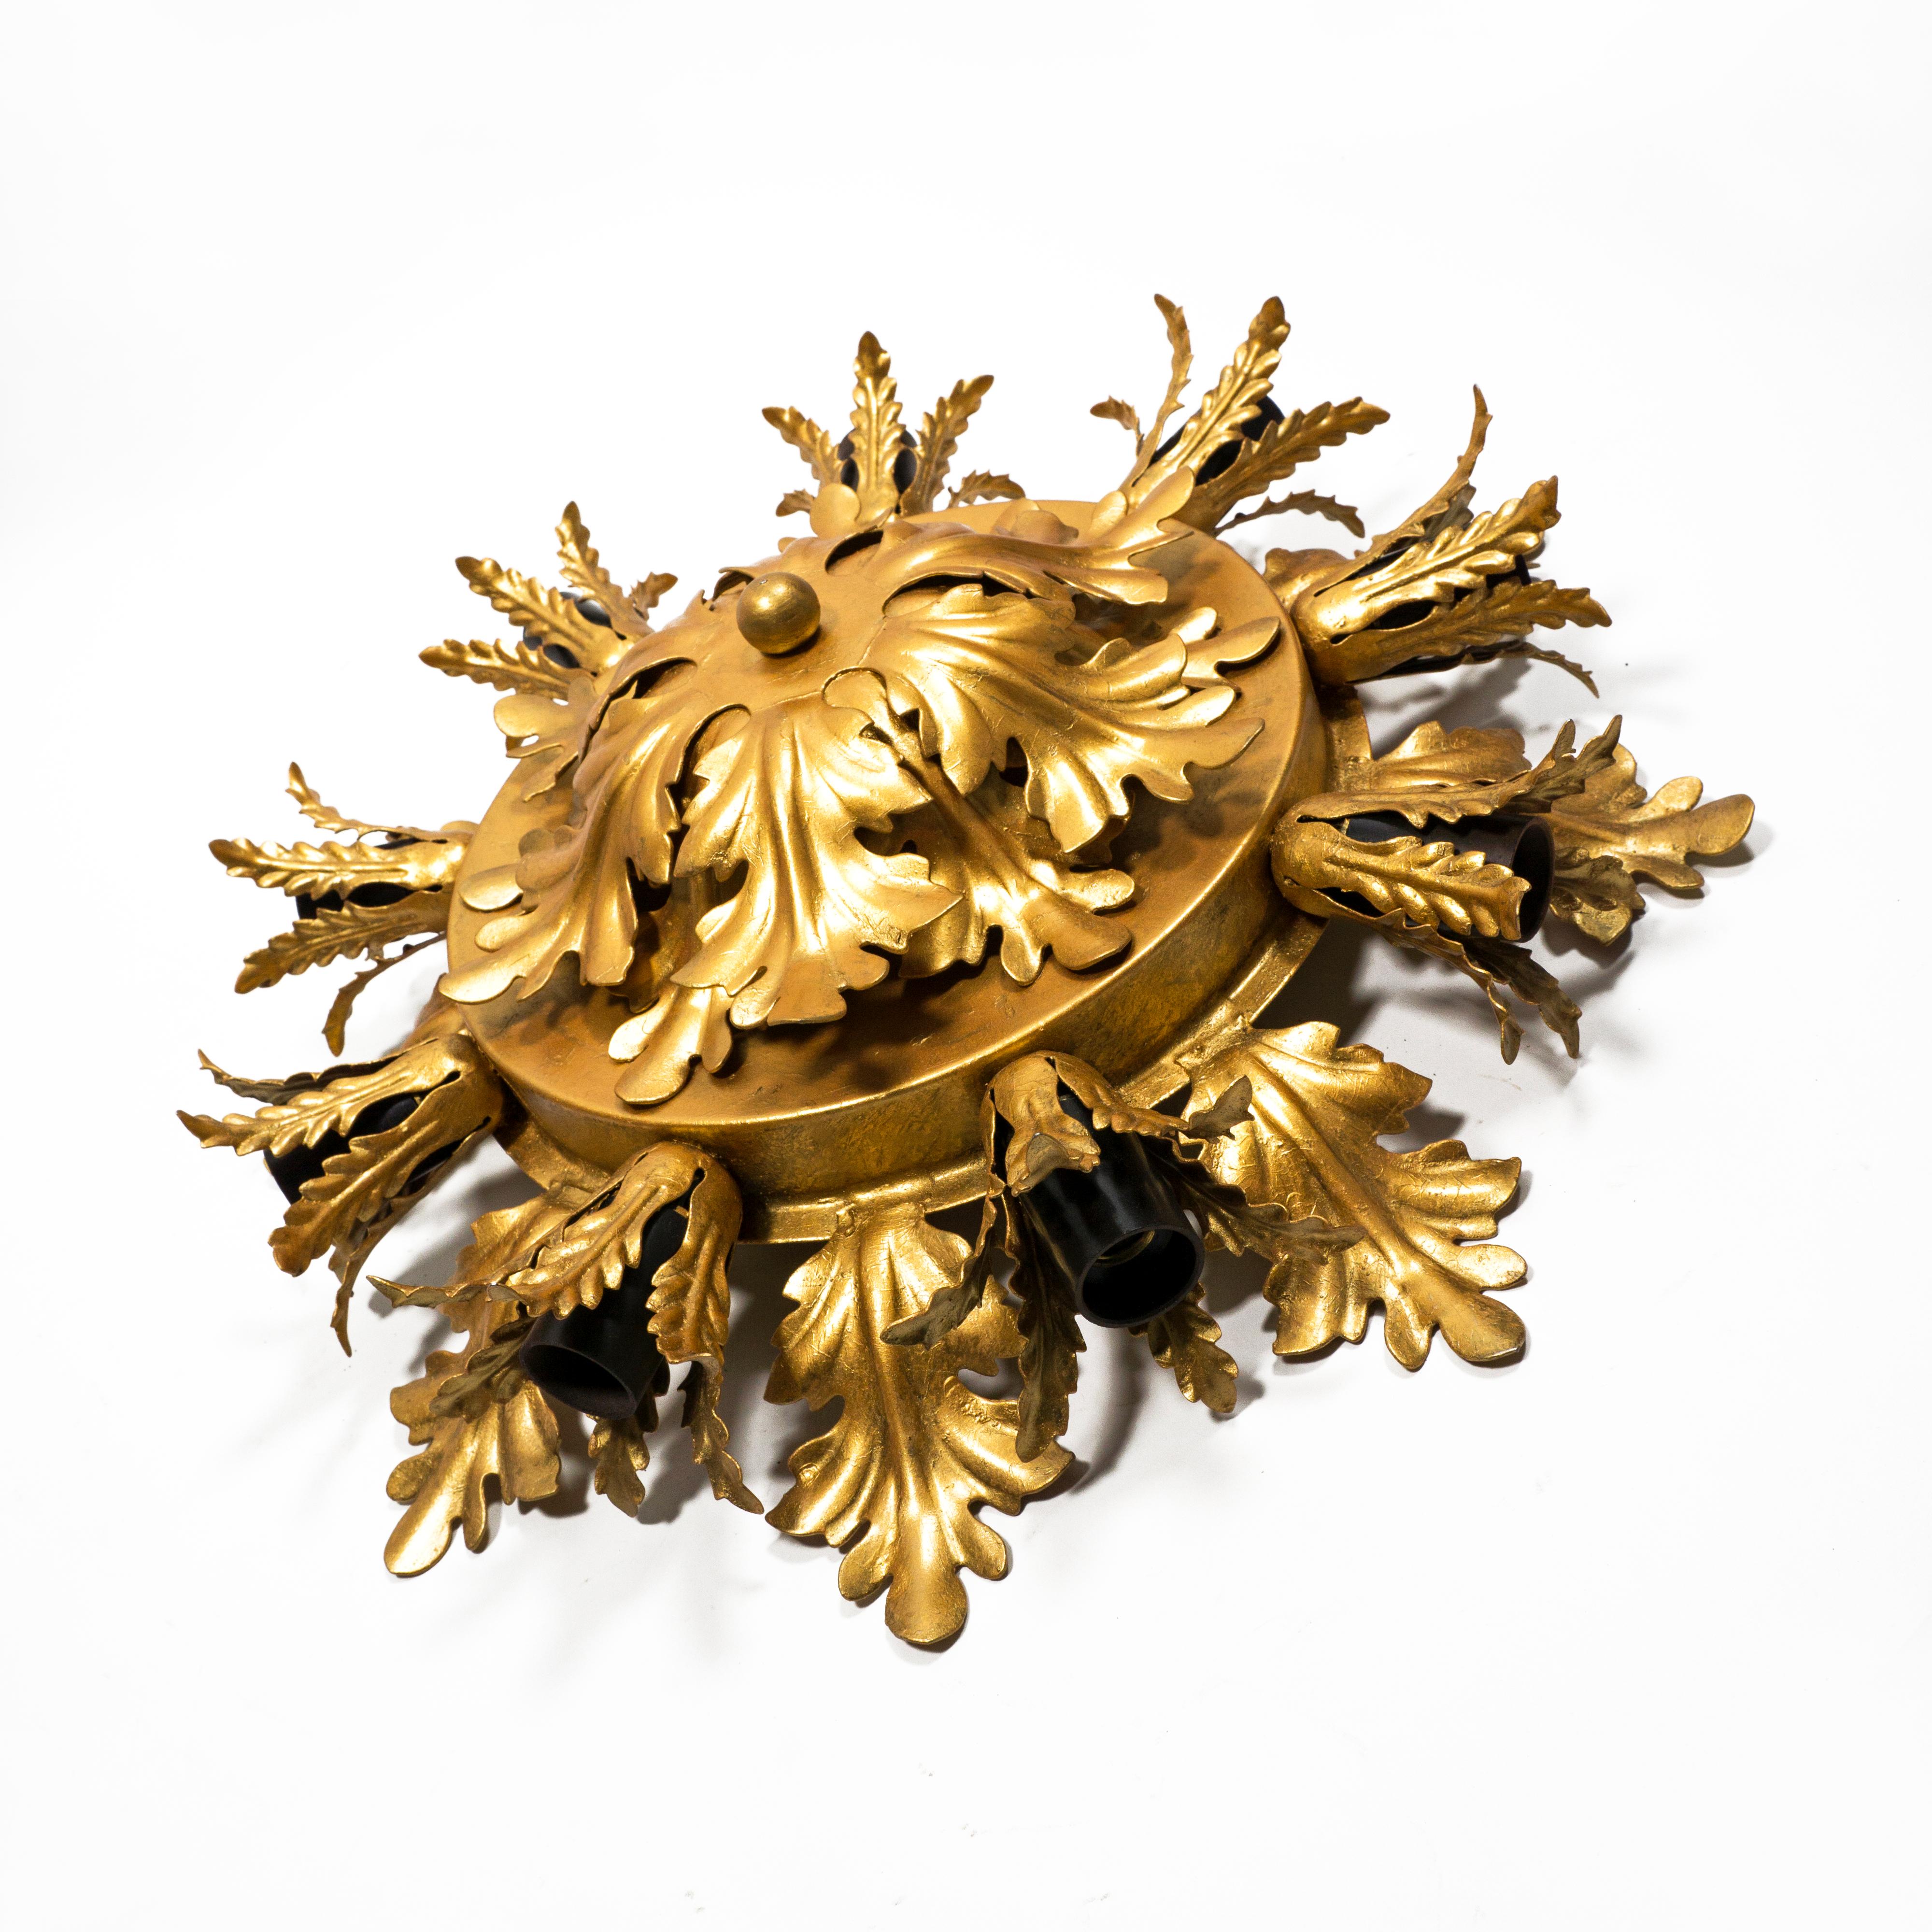 Hollywood Regency Mid Century Banci Firenze Ceiling Lamp  Wall Lamp from the 1970s.
This beautiful, large Florentine lamp consisting of many gilded leaves and a central flower and creates a very pleasant light. The lamp captivates with the natural